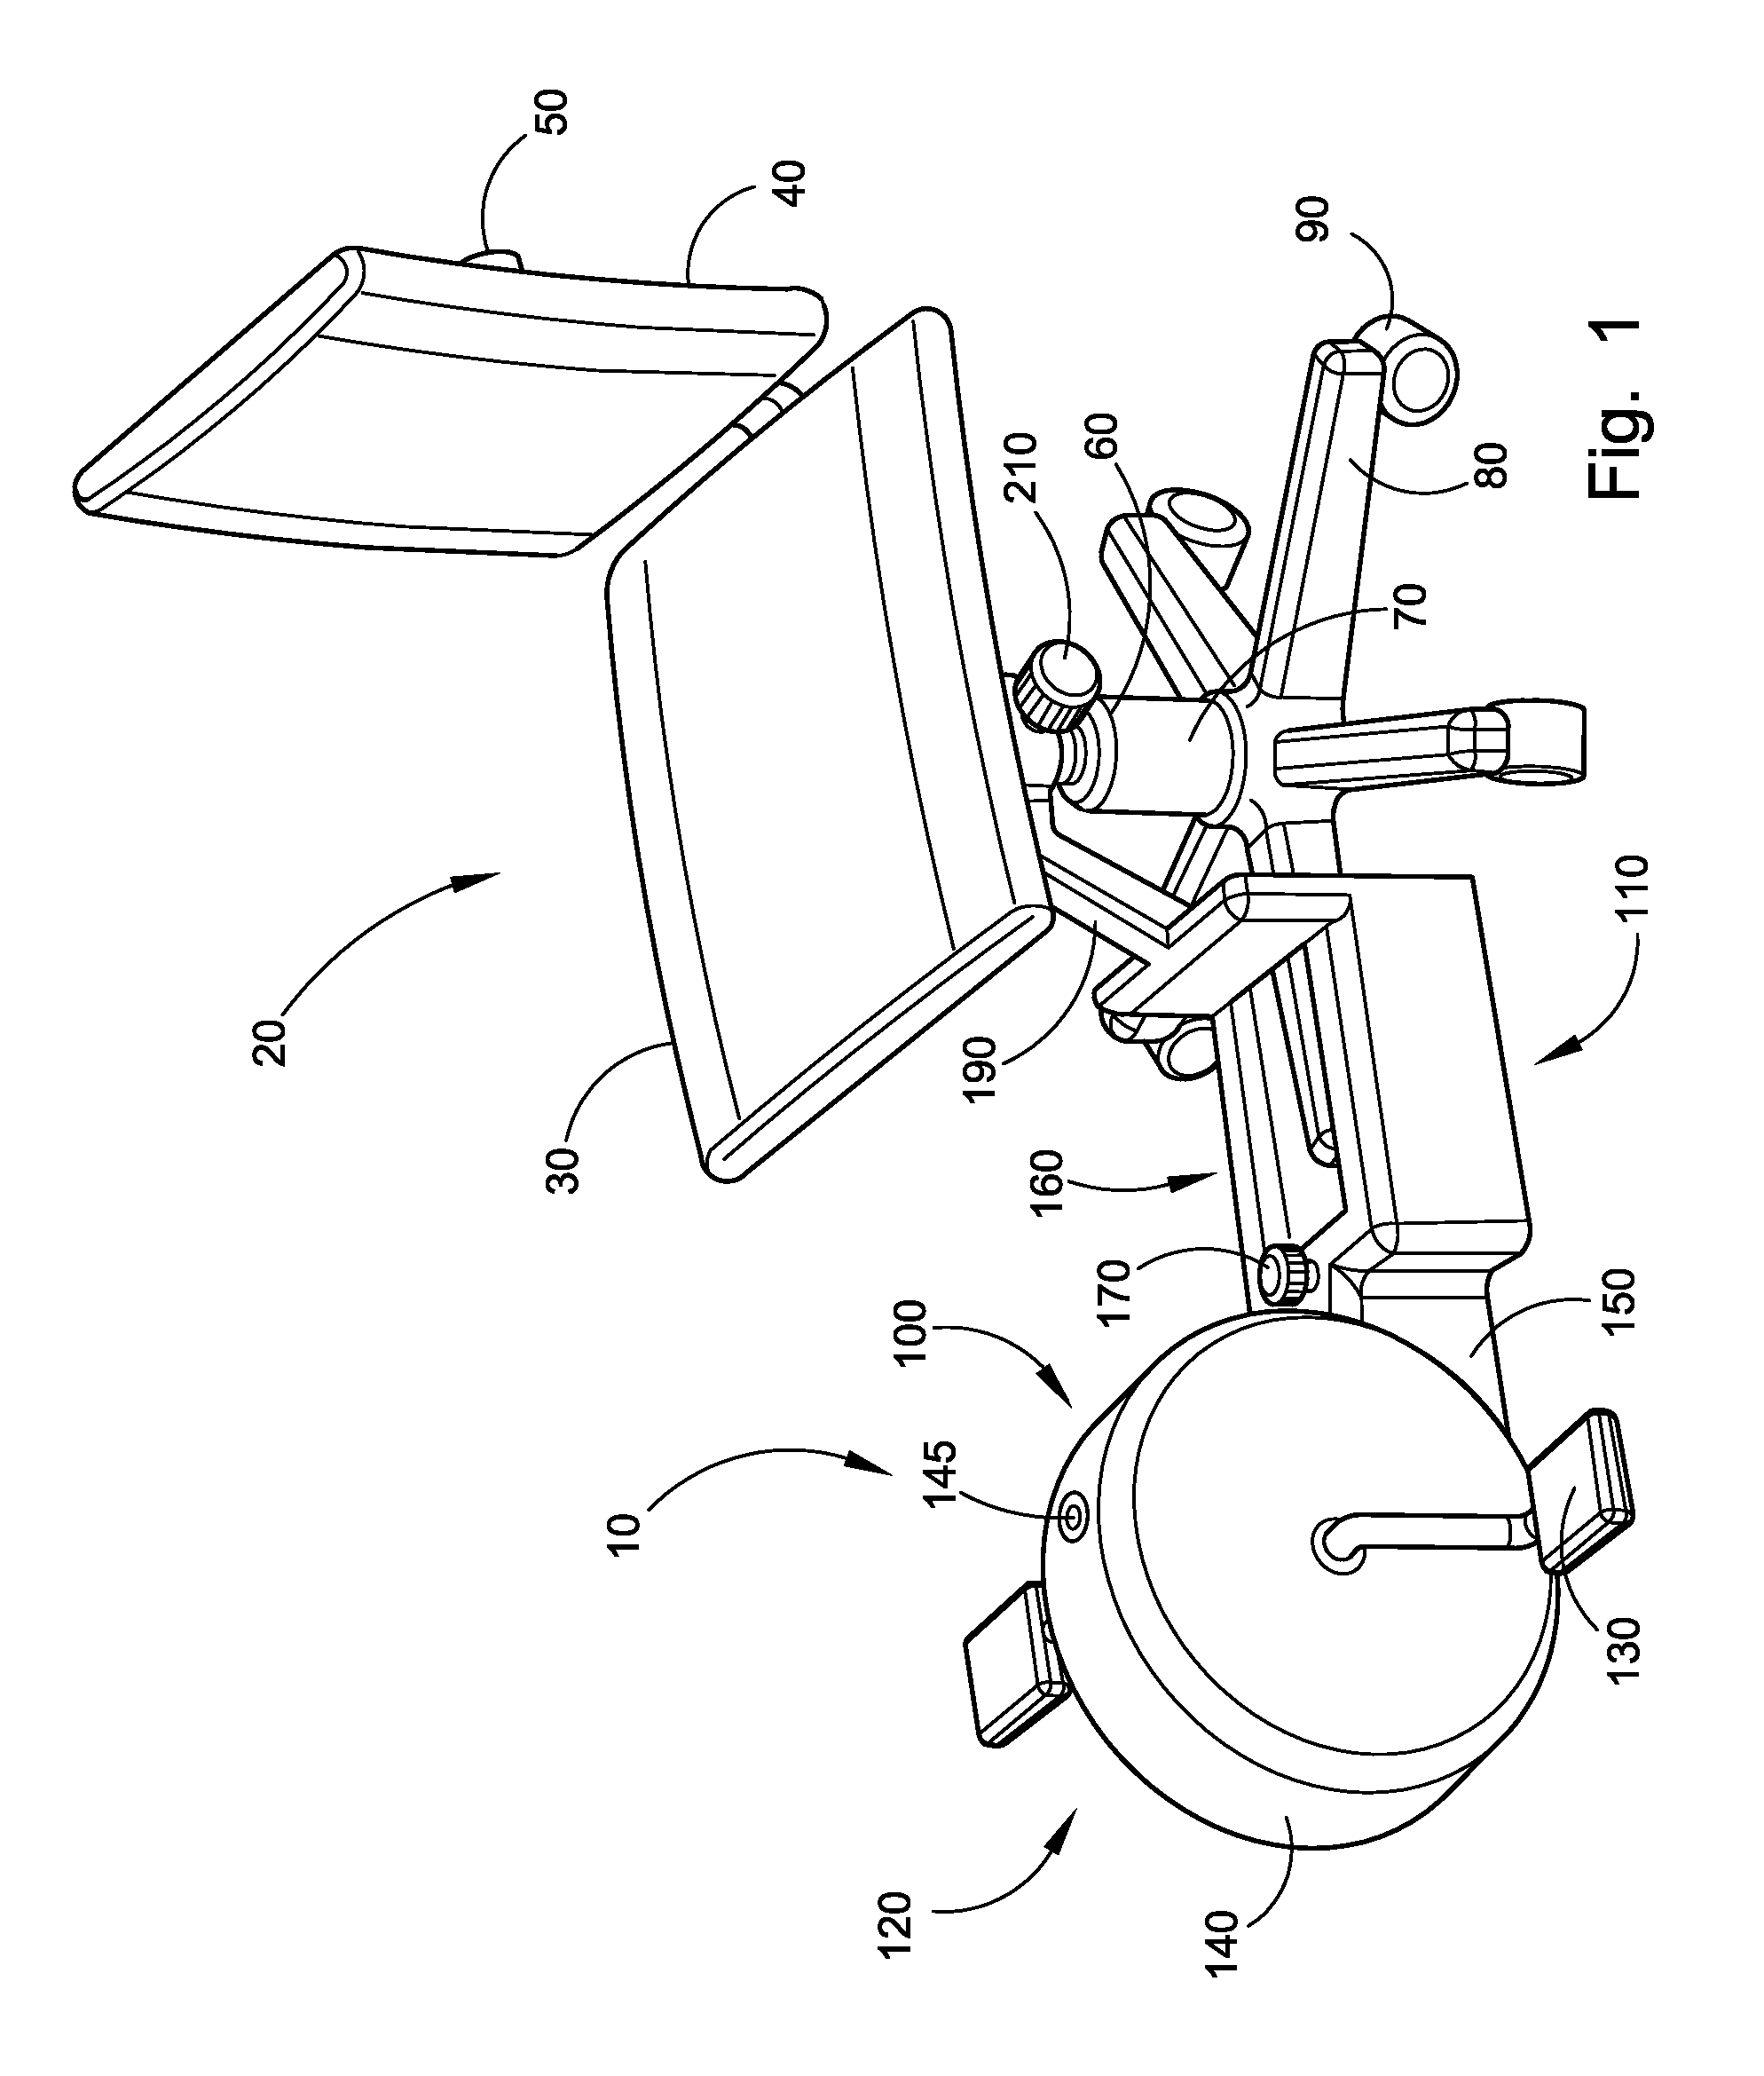 Leg exercise device for use with an office chair